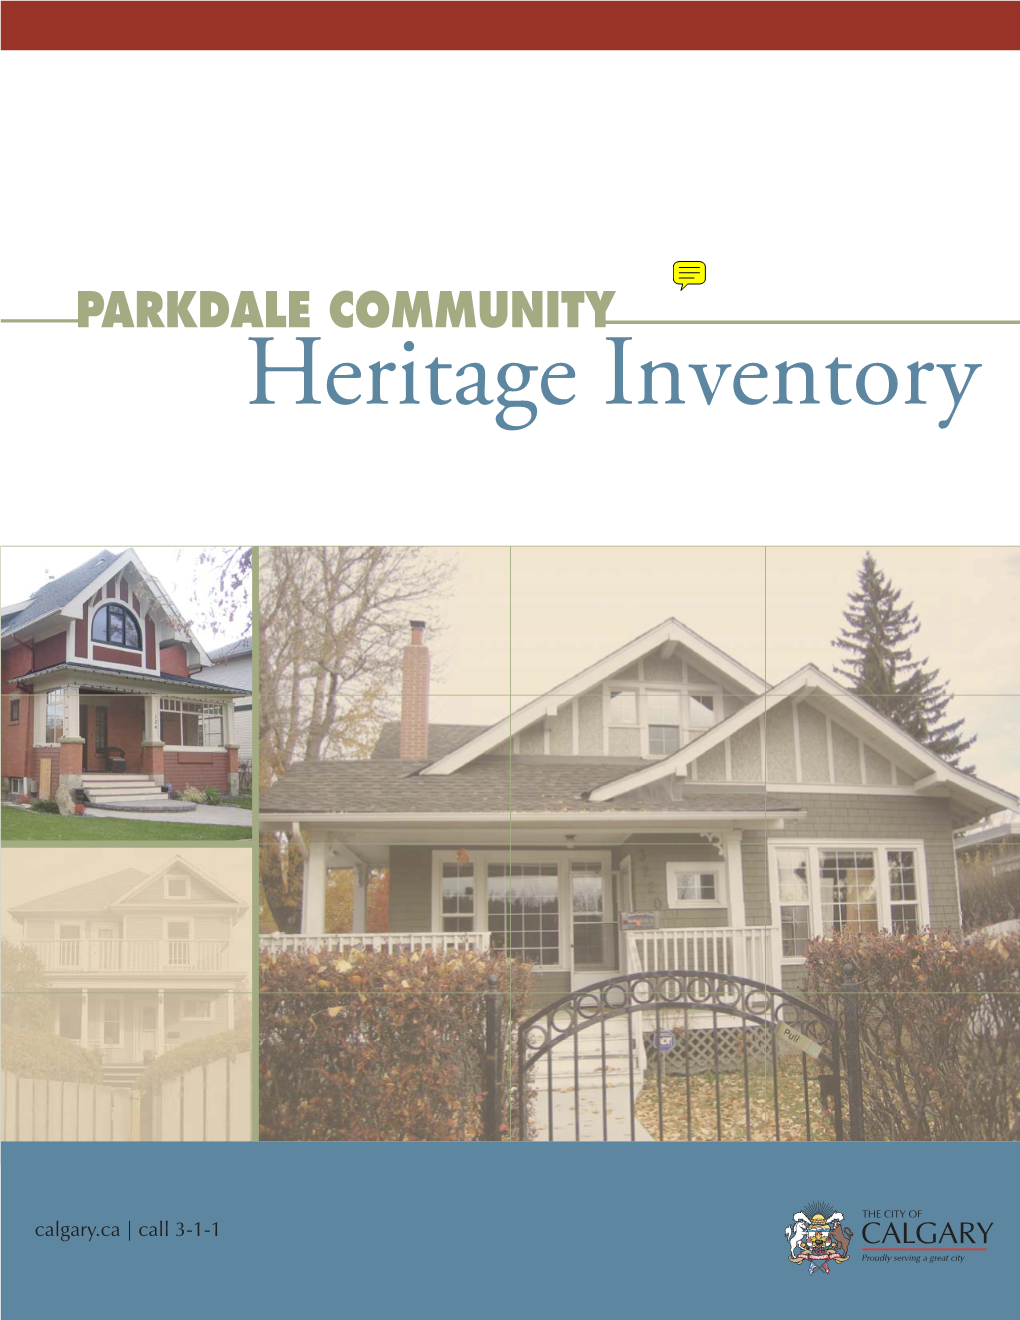 PARKDALE COMMUNITY Heritage Inventory